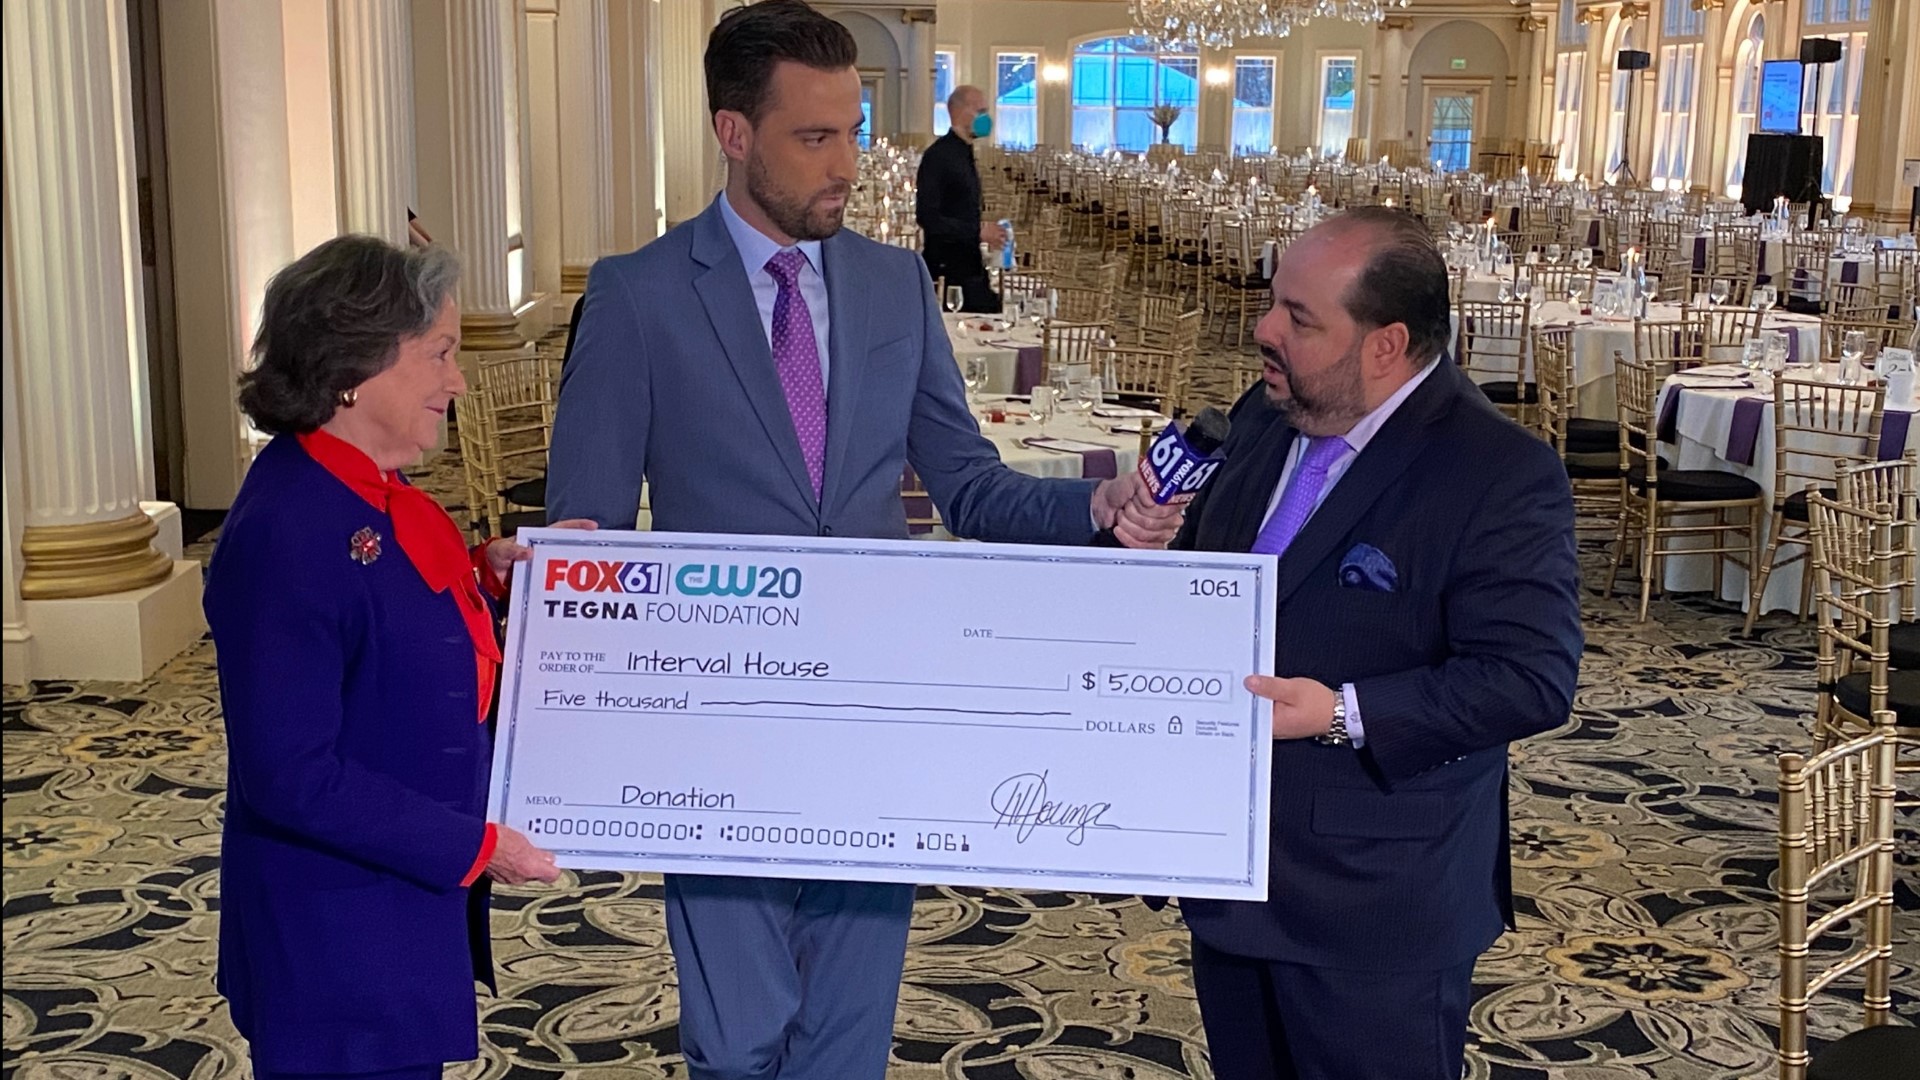 FOX61/TEGNA Foundation presented a $5,000 check to the Interval House in Connecticut.